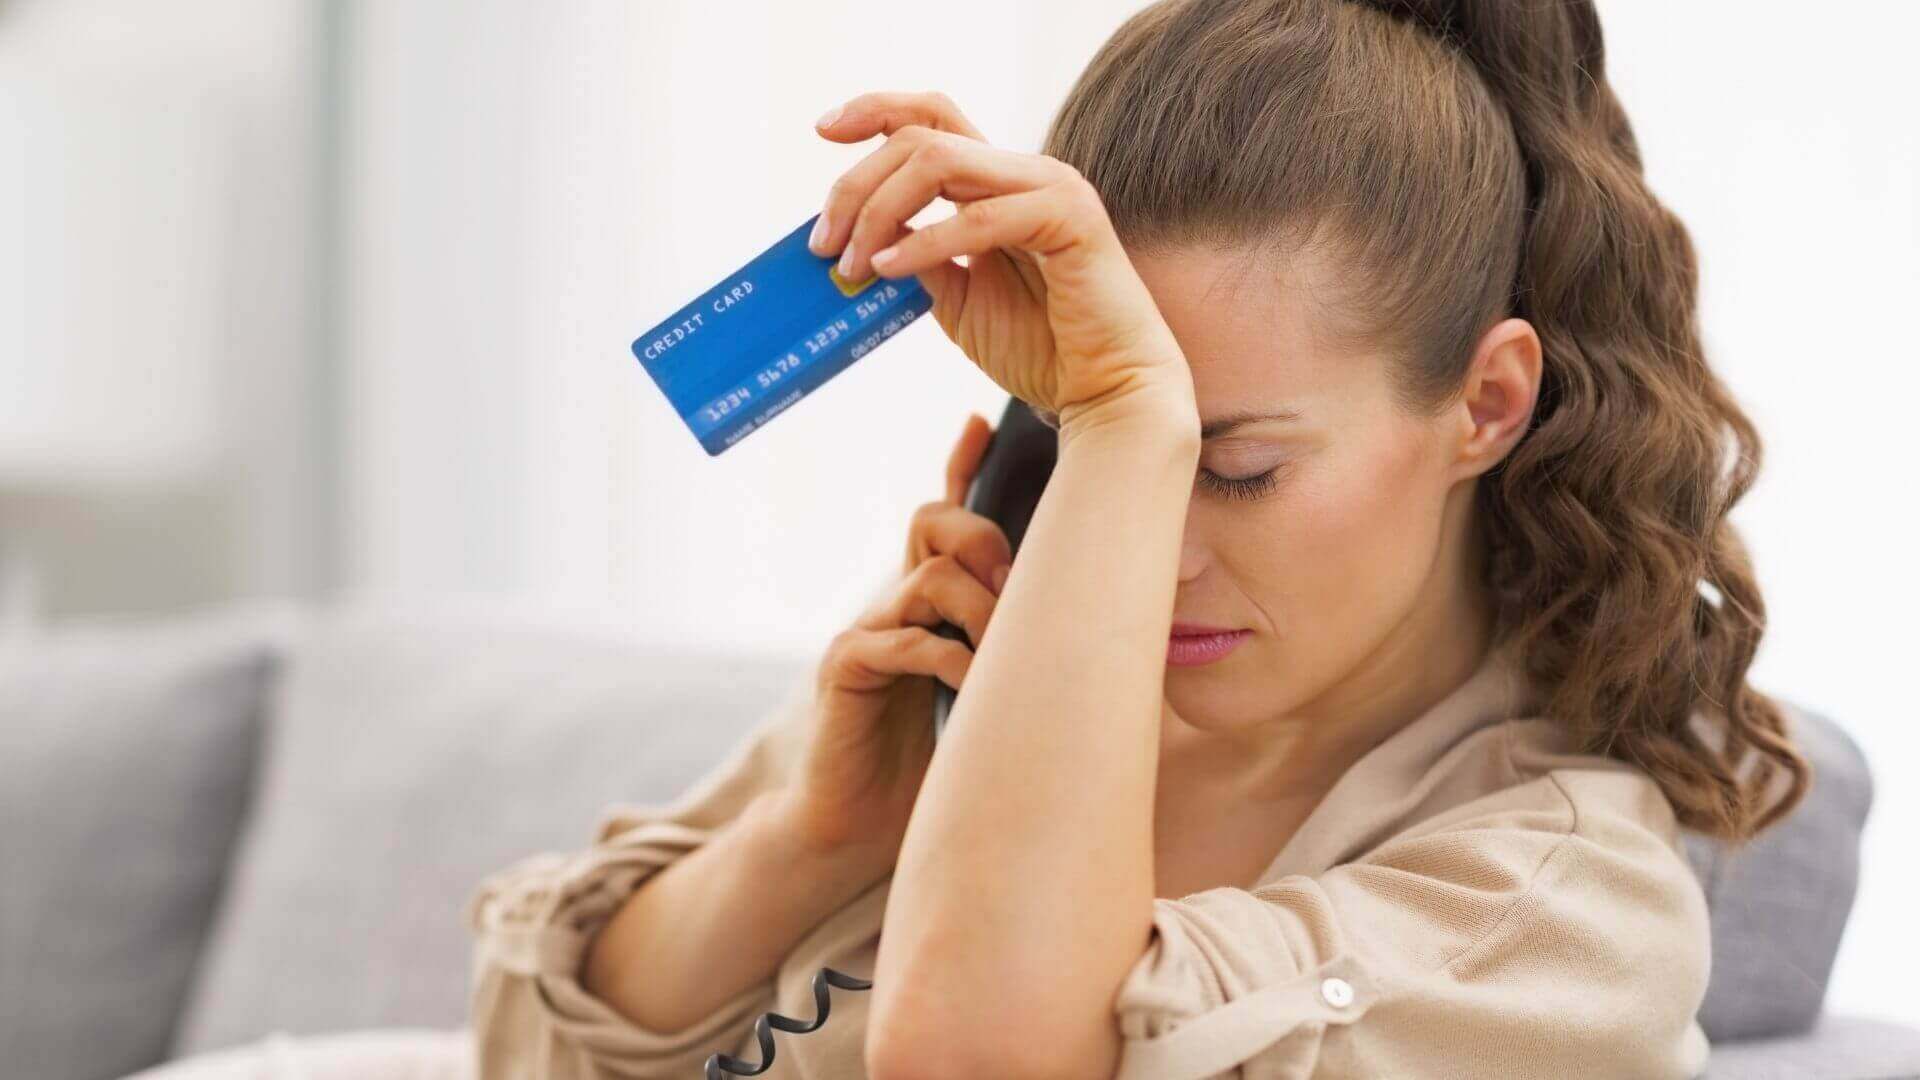 woman with credit card